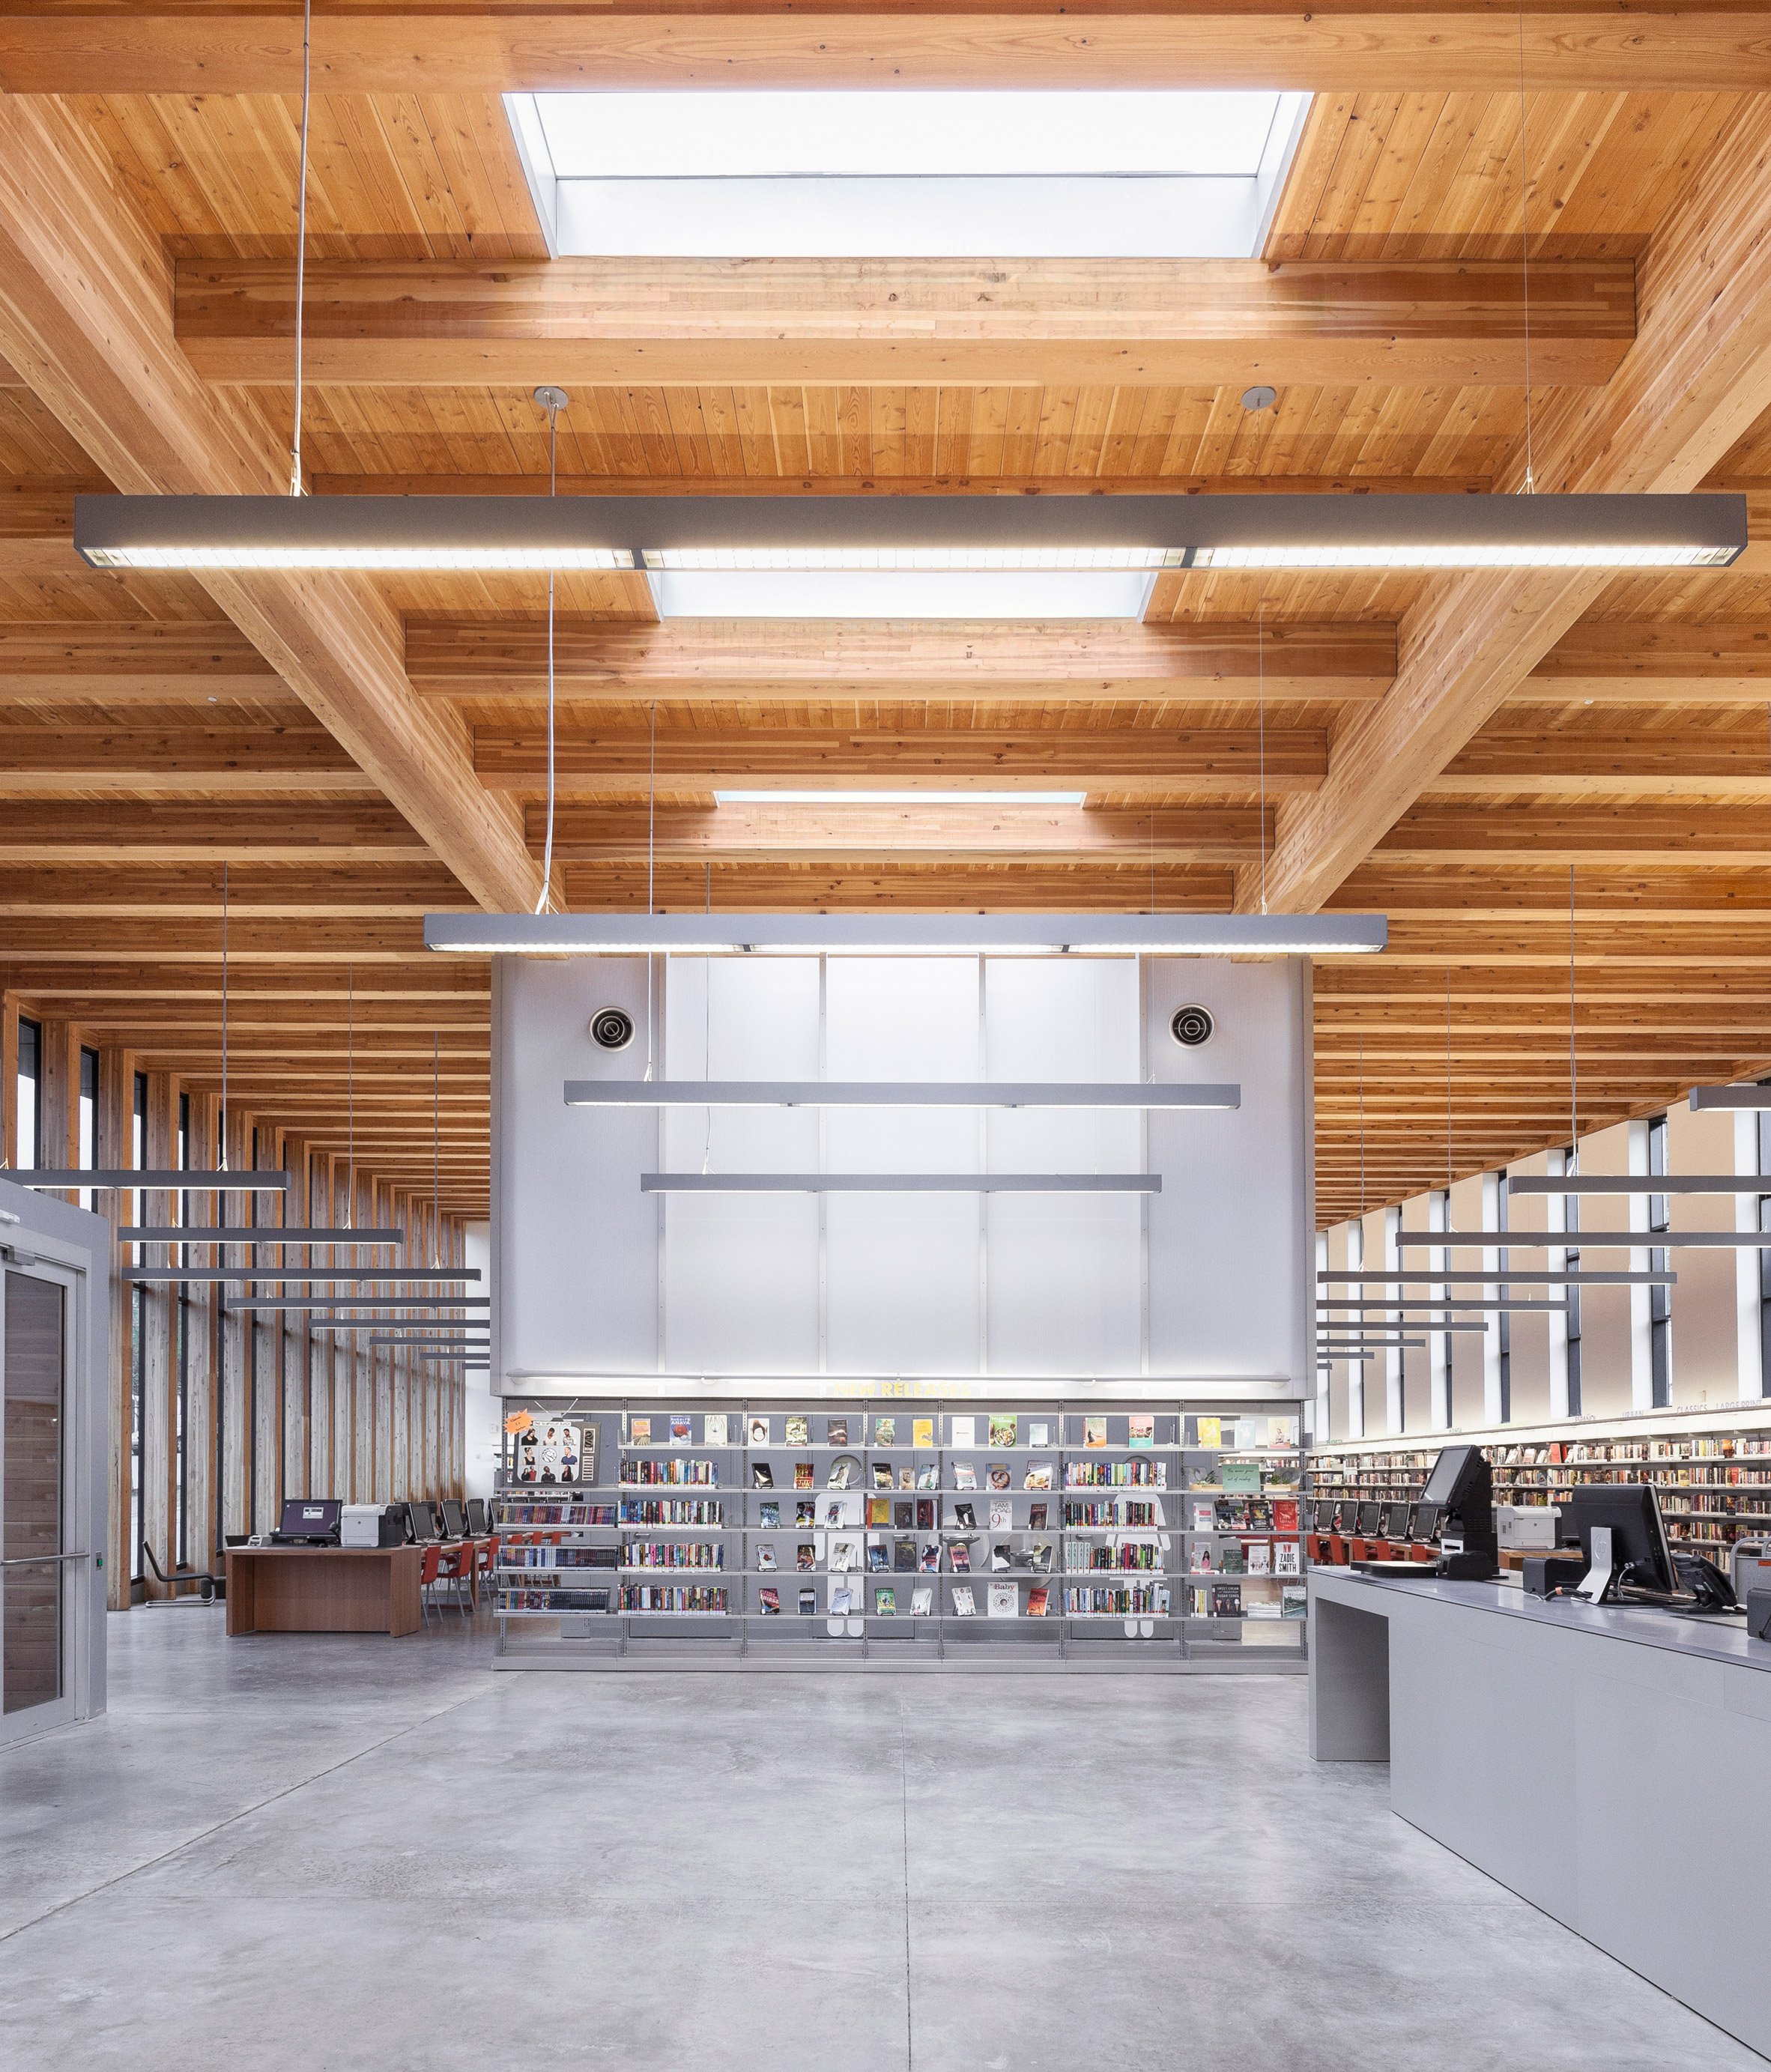 Stapleton branch of the New York Public Library by Andrew Berman Architects